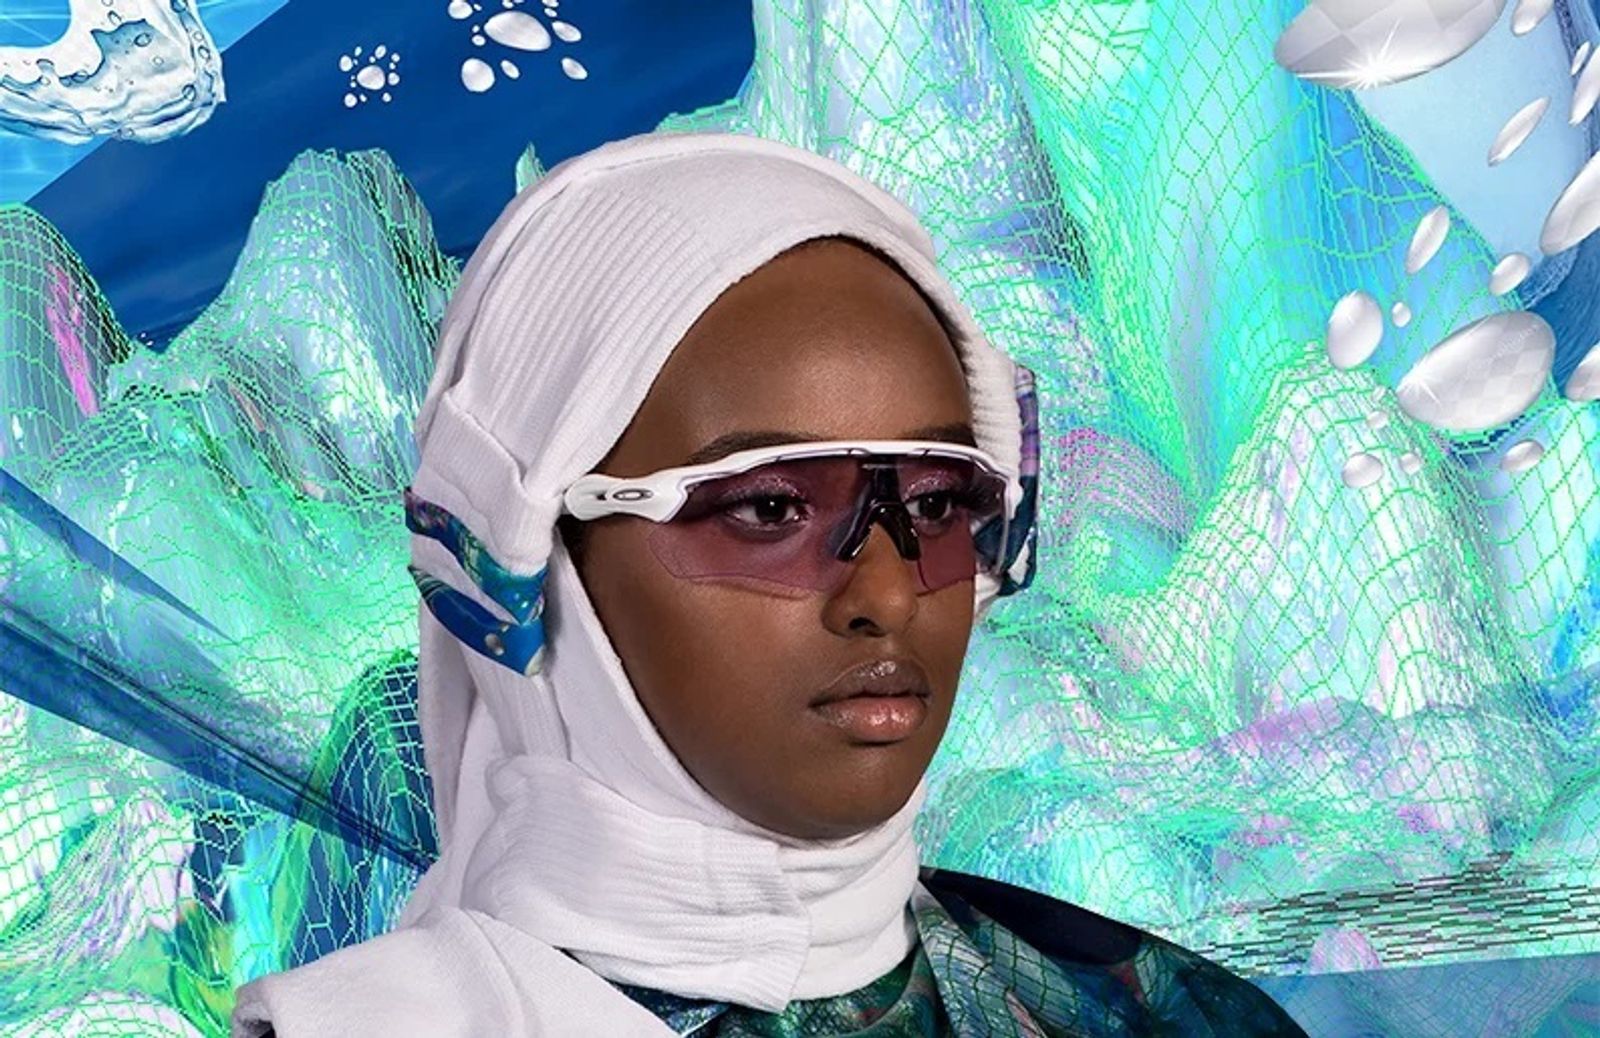 © Perrine Philomeen, from the series Hijab in Transition. 2020 exhibitor